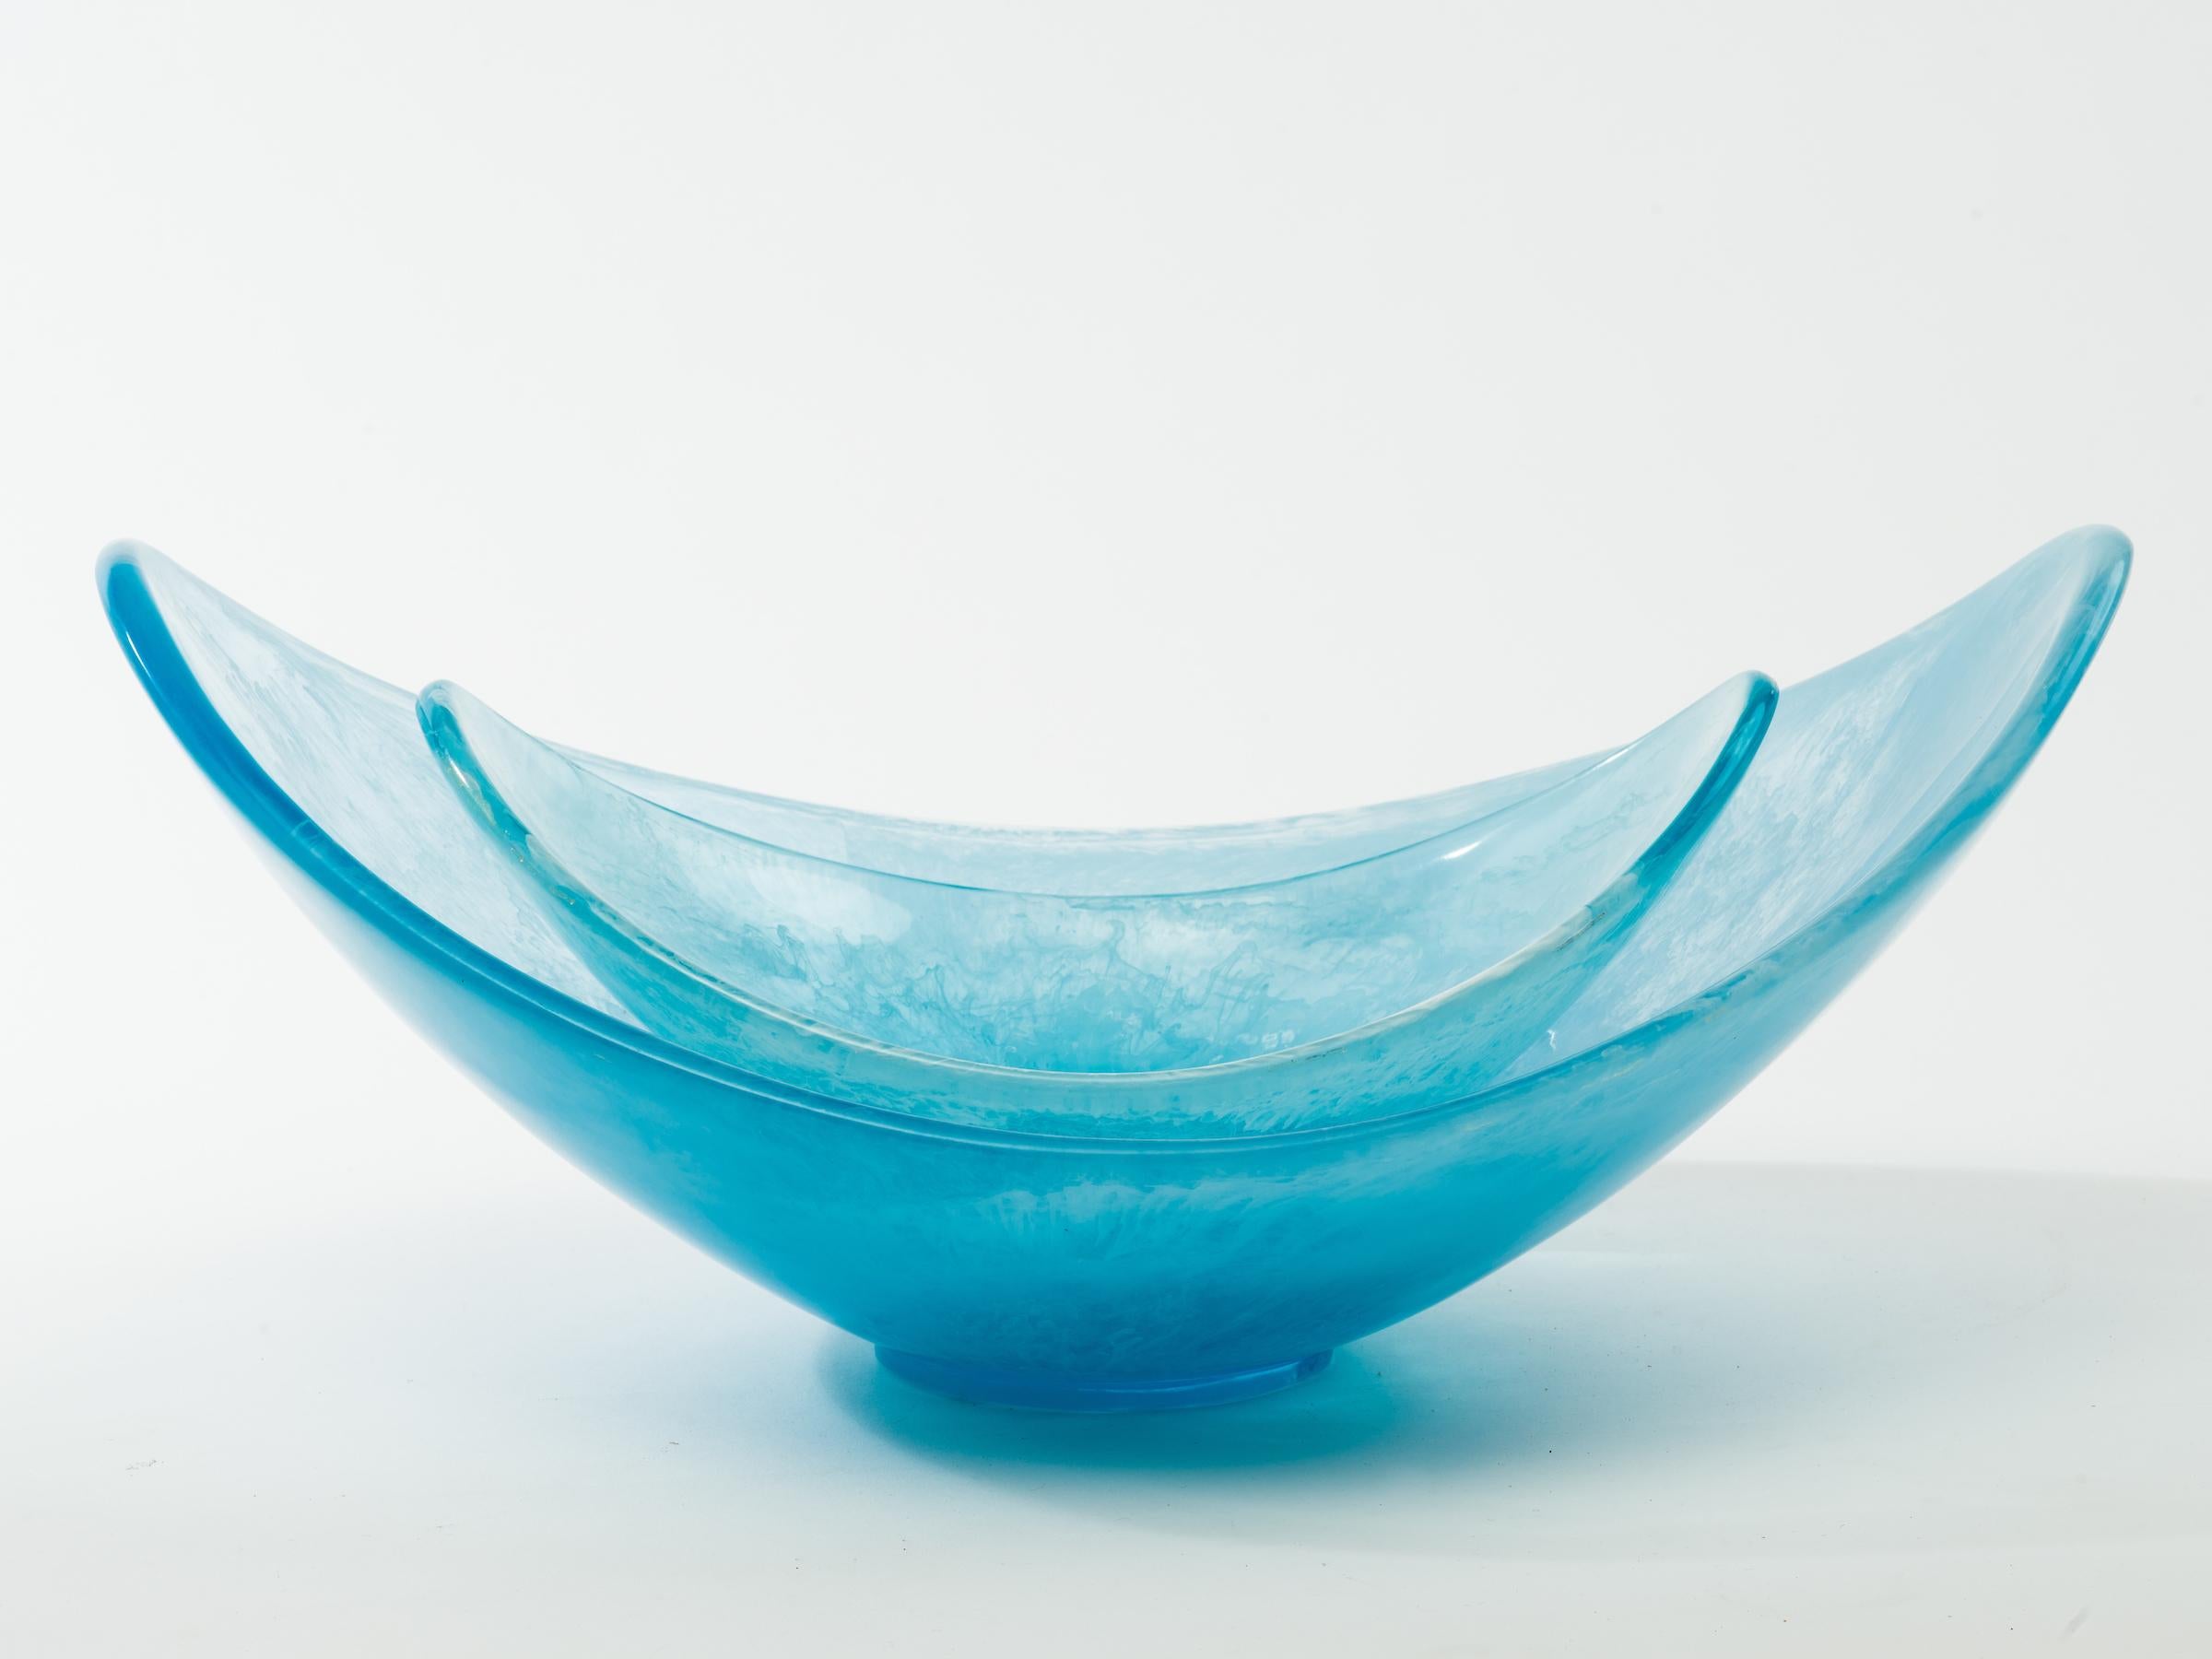 Set of graceful aquamarine acrylic scoop serving bowls. Large bowl measures 20.5 inches length x 13.5 inches depth x 9 inches height. Smaller bowl measures 13.5 inches length x 9 inches depth x 6 inches height.